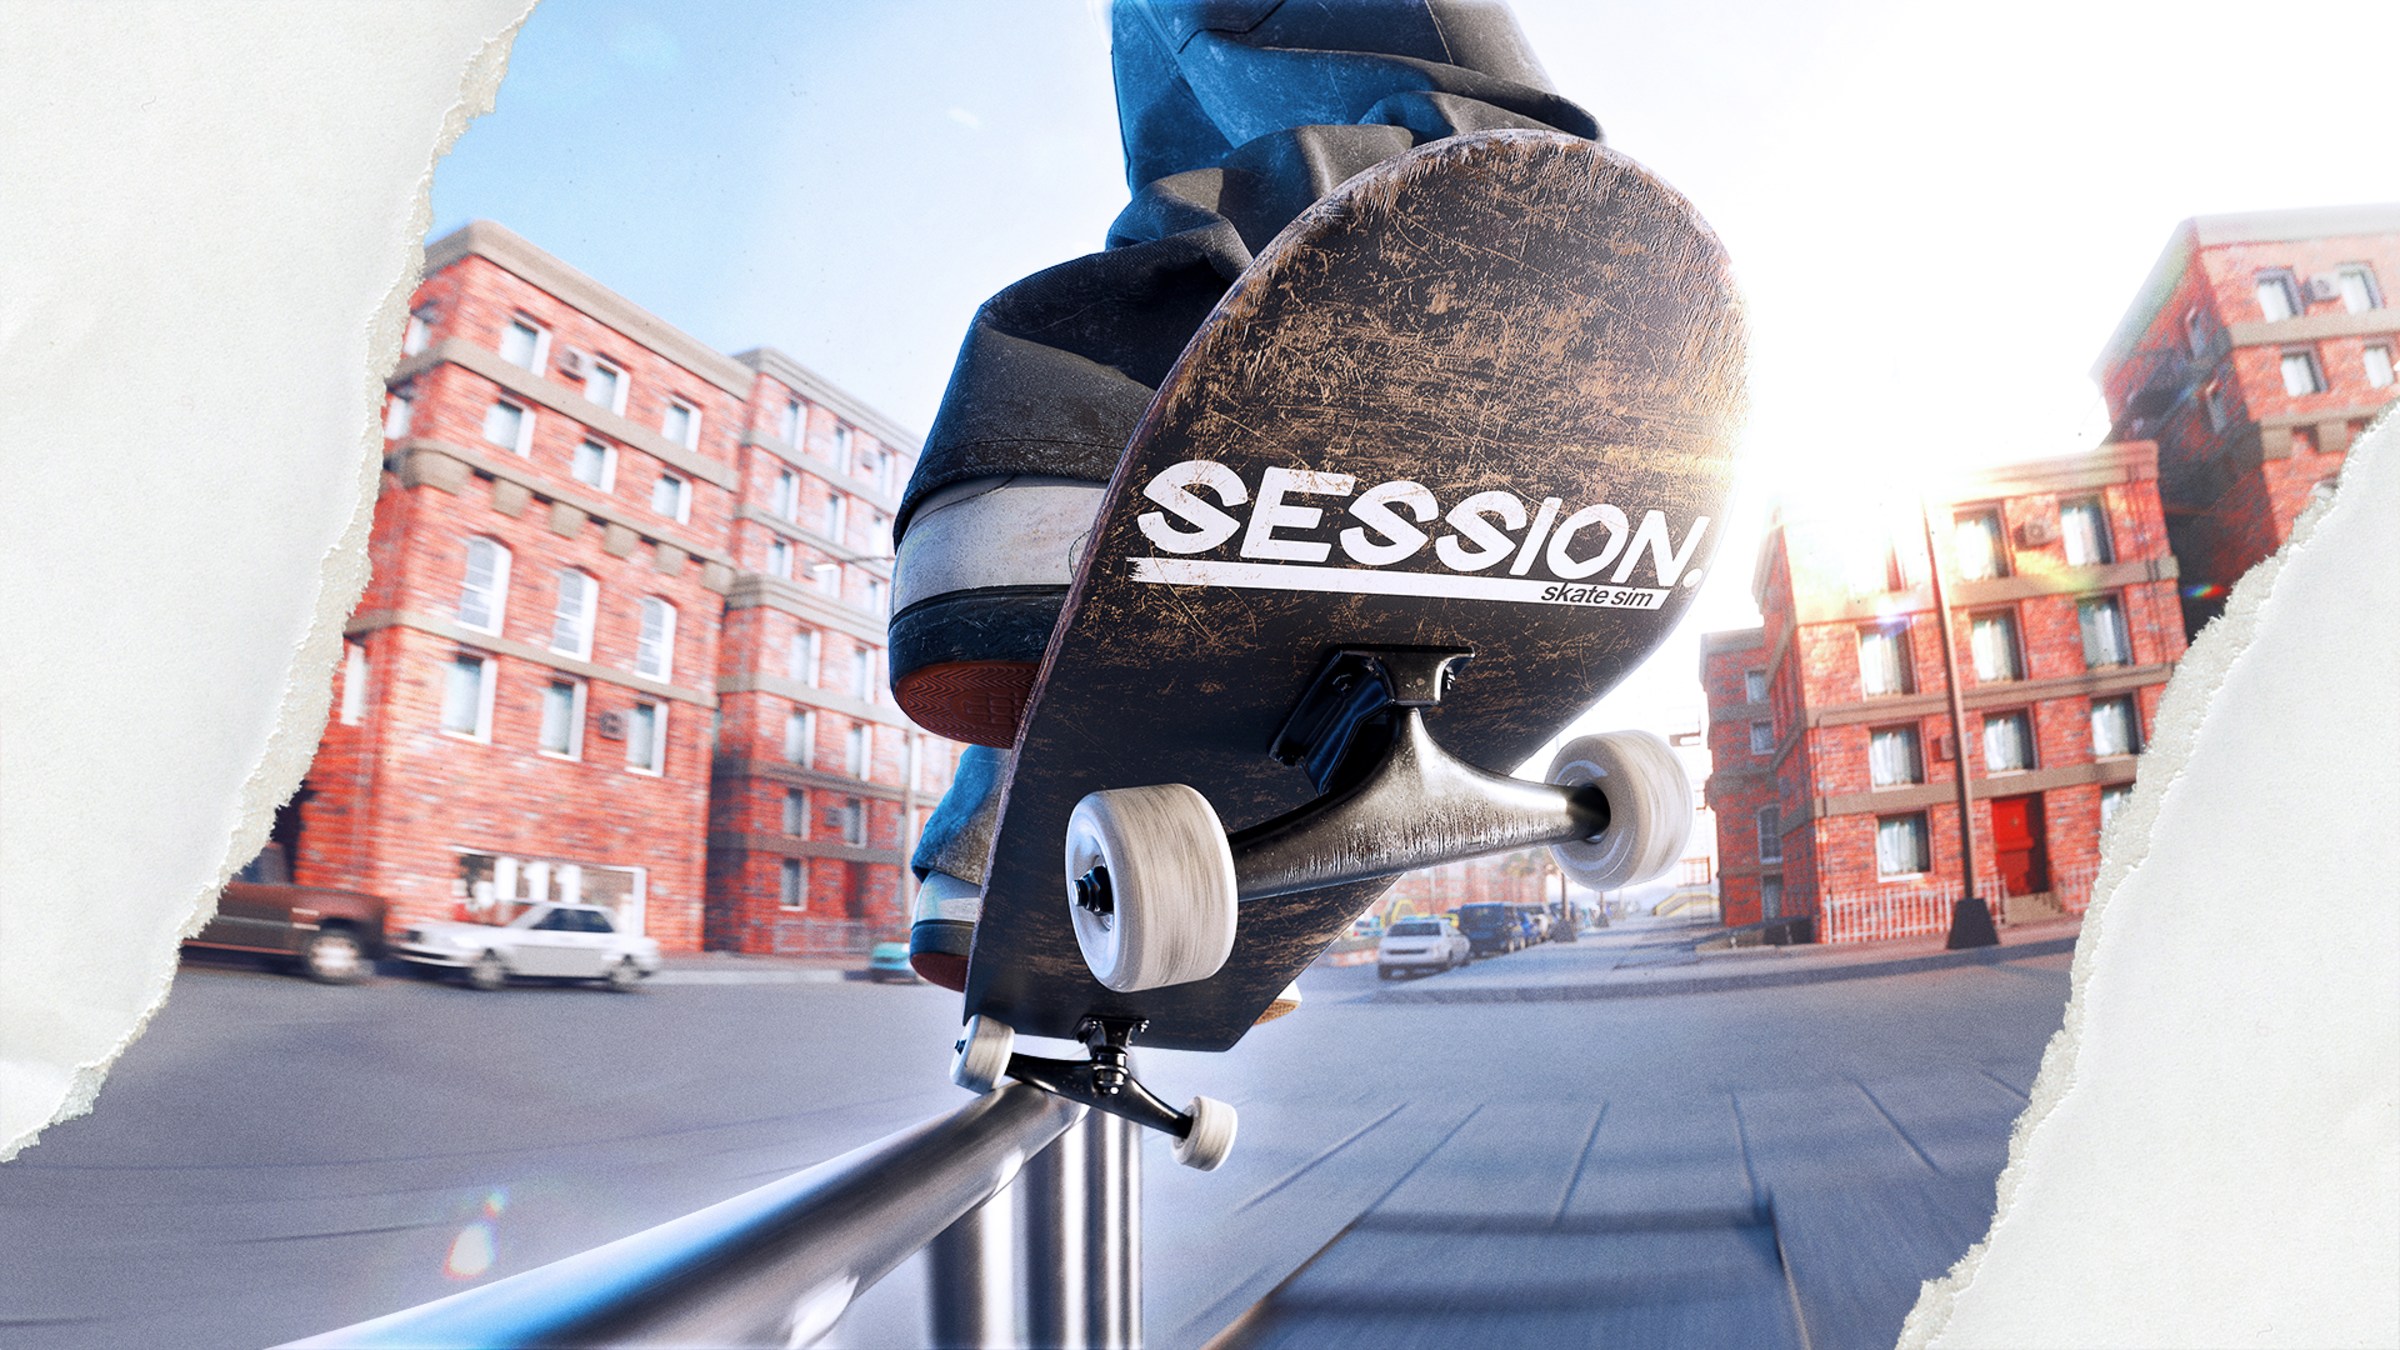 Skate 4' is launching soon and will support user-generated content